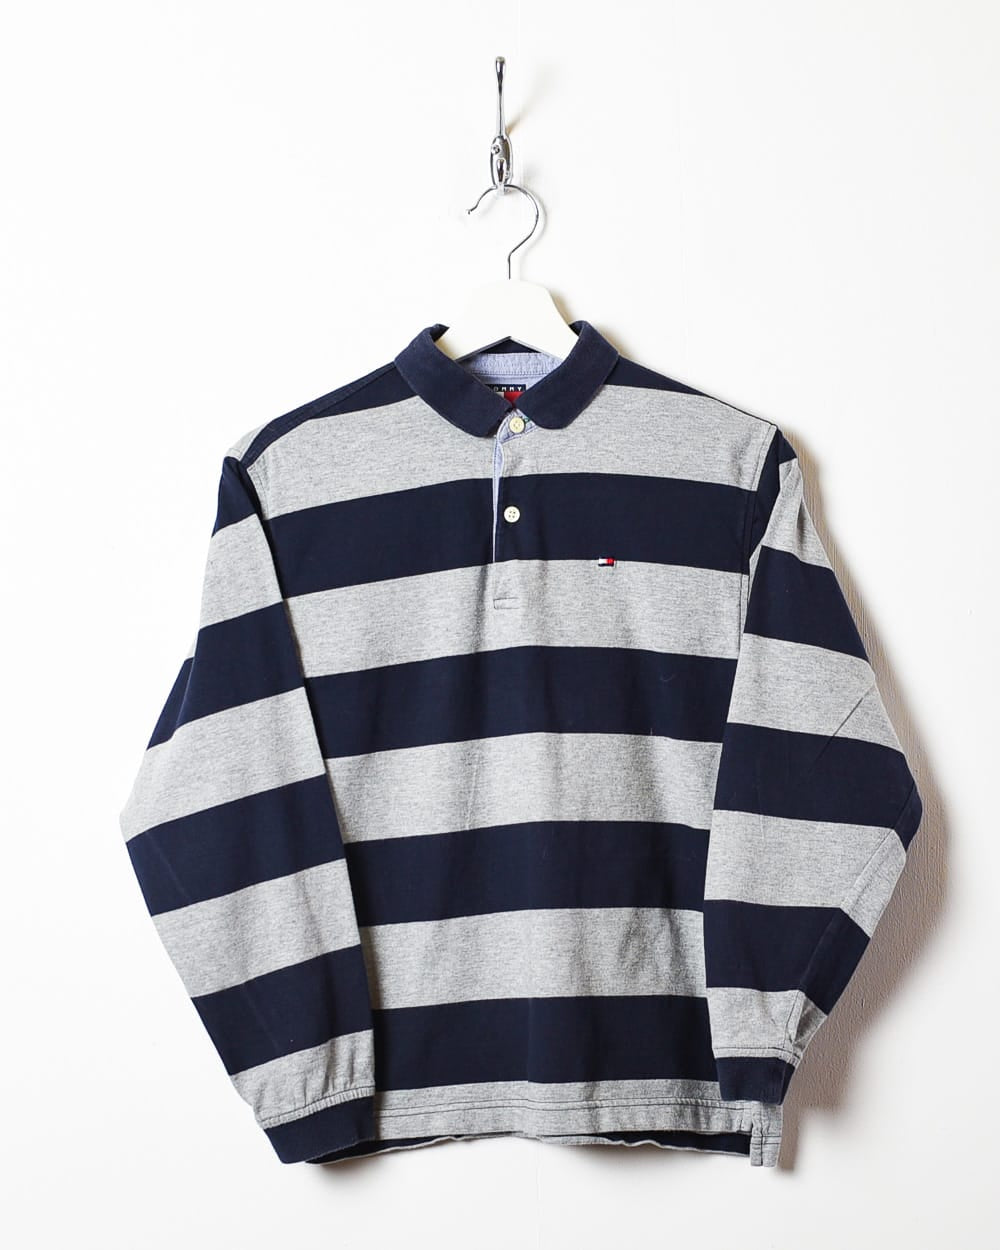 Stone Tommy Hilfiger Striped Rugby Shirt - Small Women's